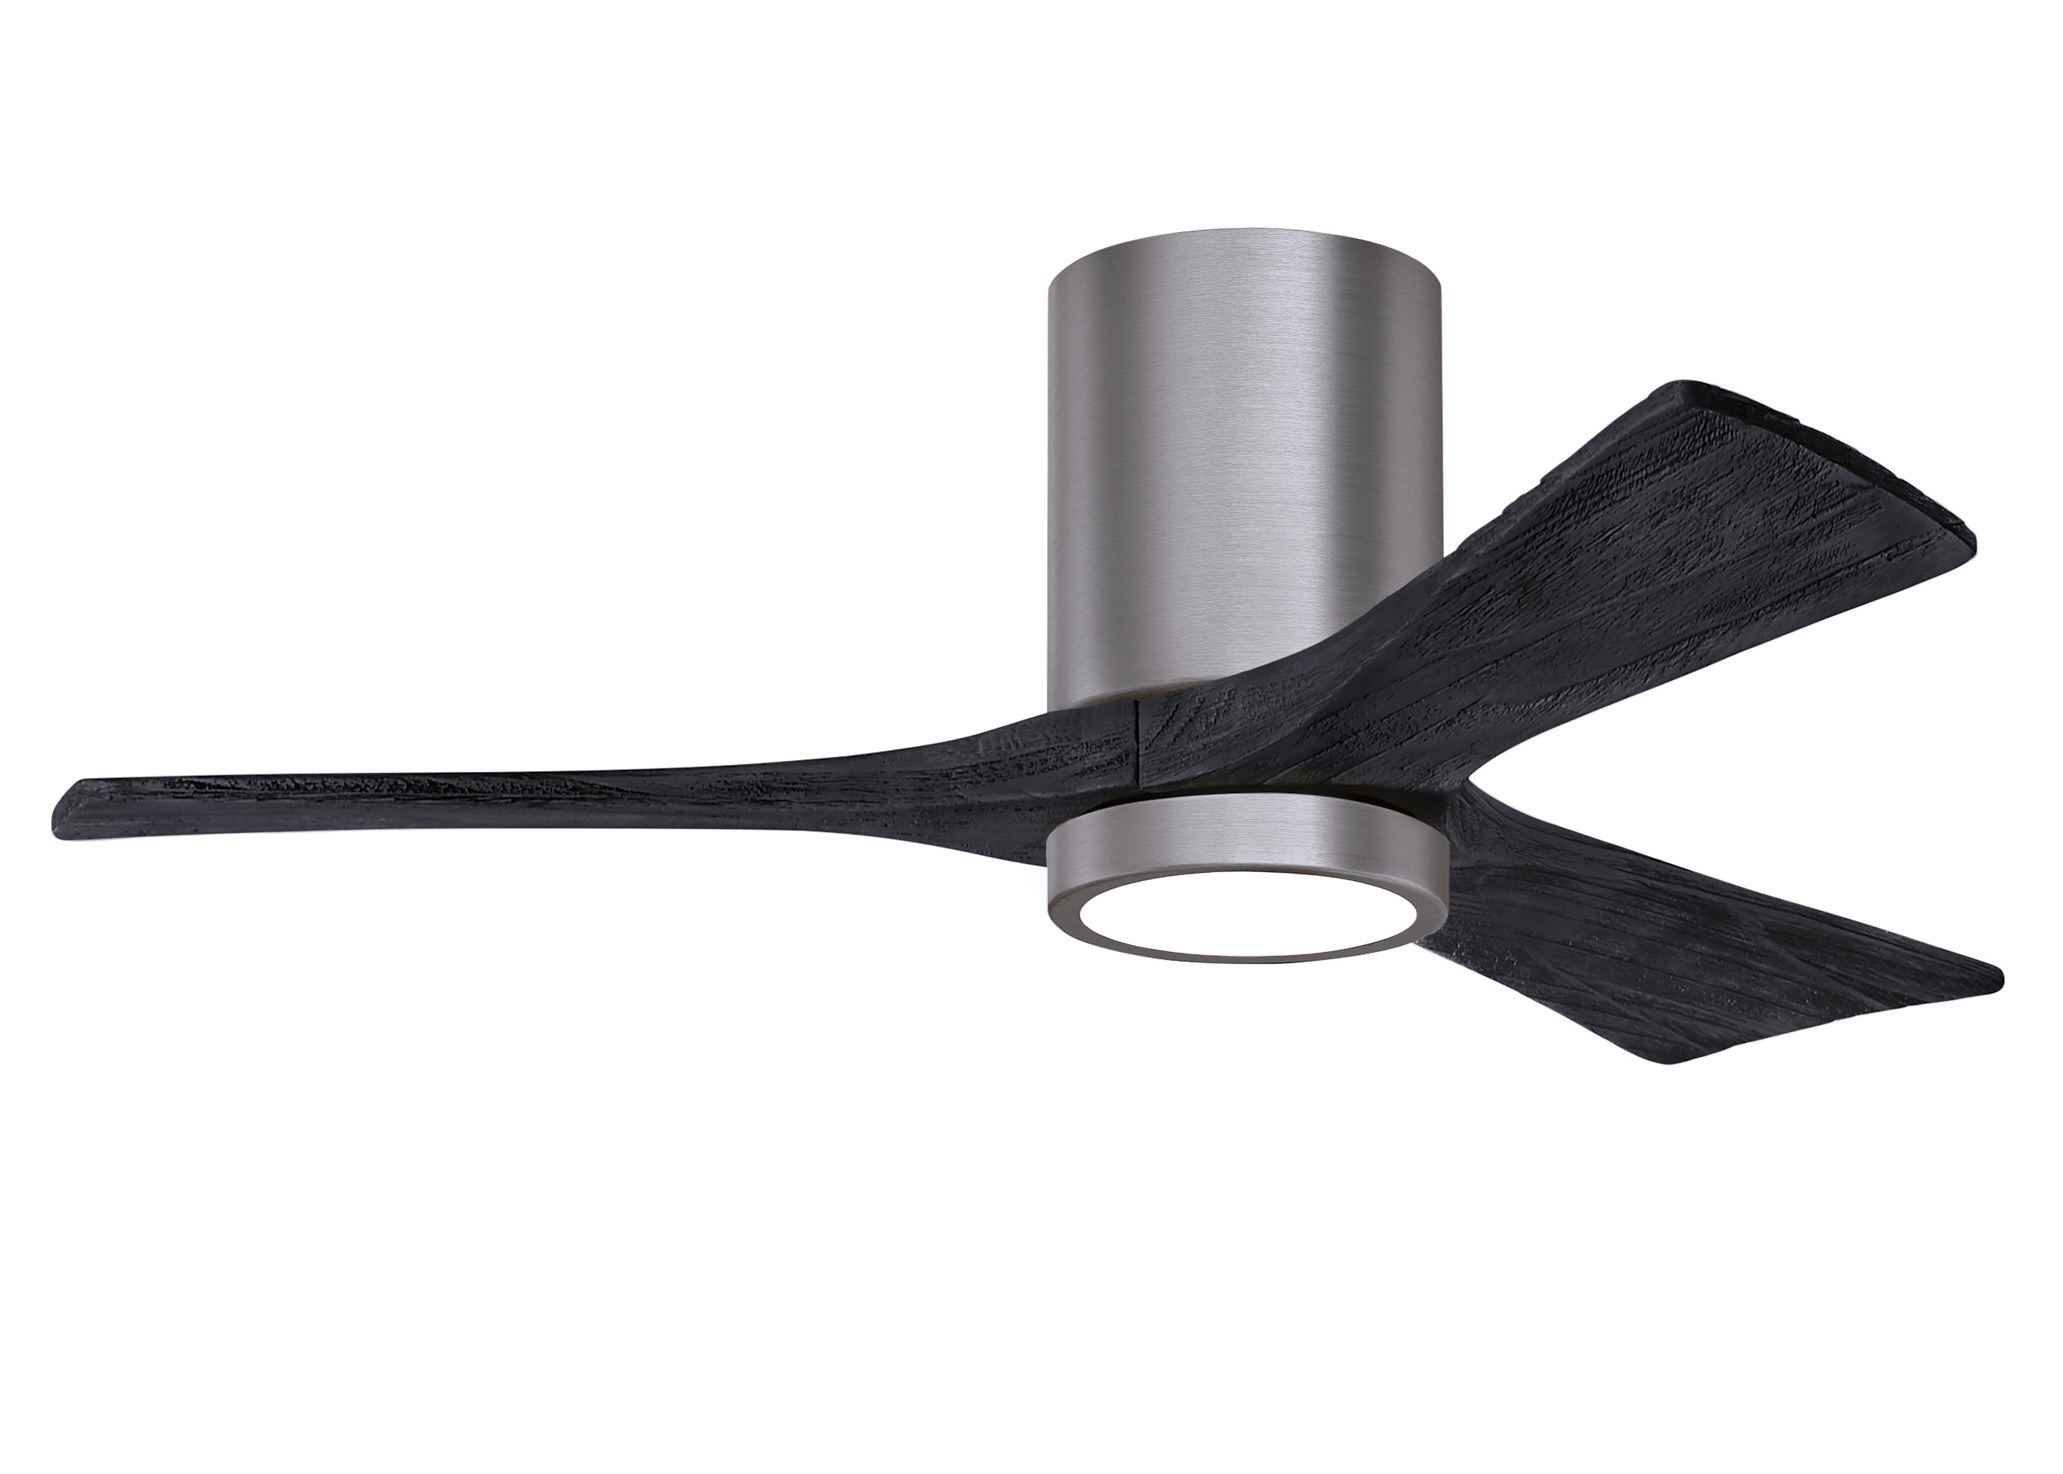 Irene-3HLK 6-speed ceiling fan in brushed pewter finish with 42